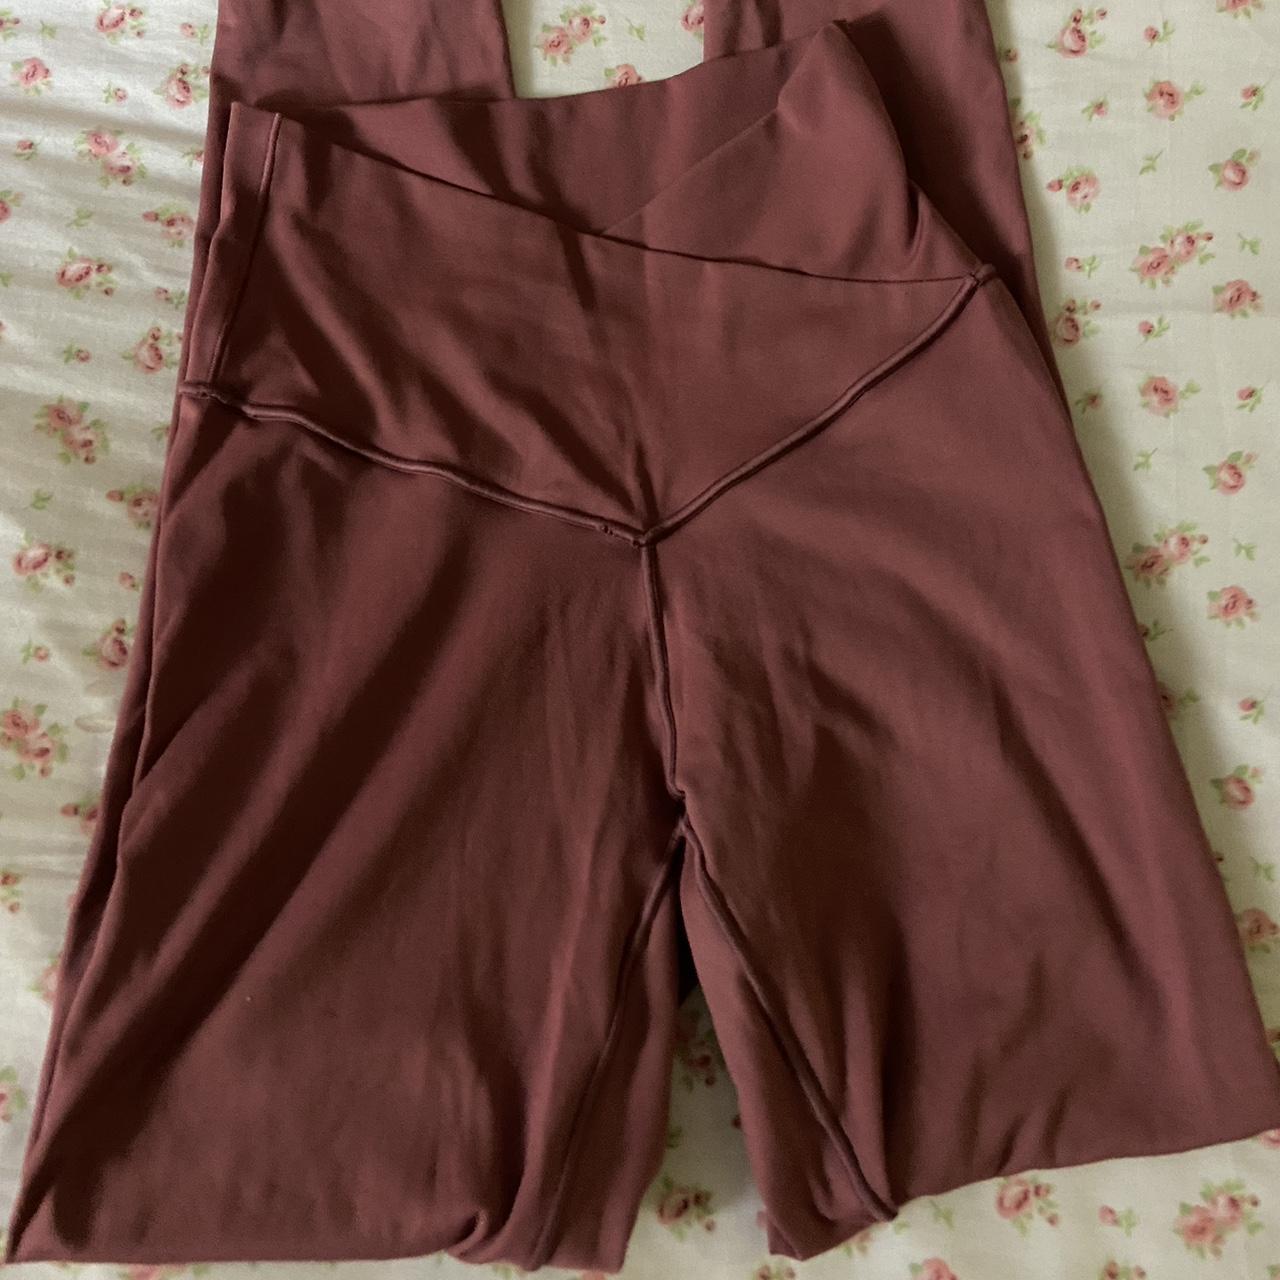 Aerie Workout Top - Size M, great condition - padded - Depop